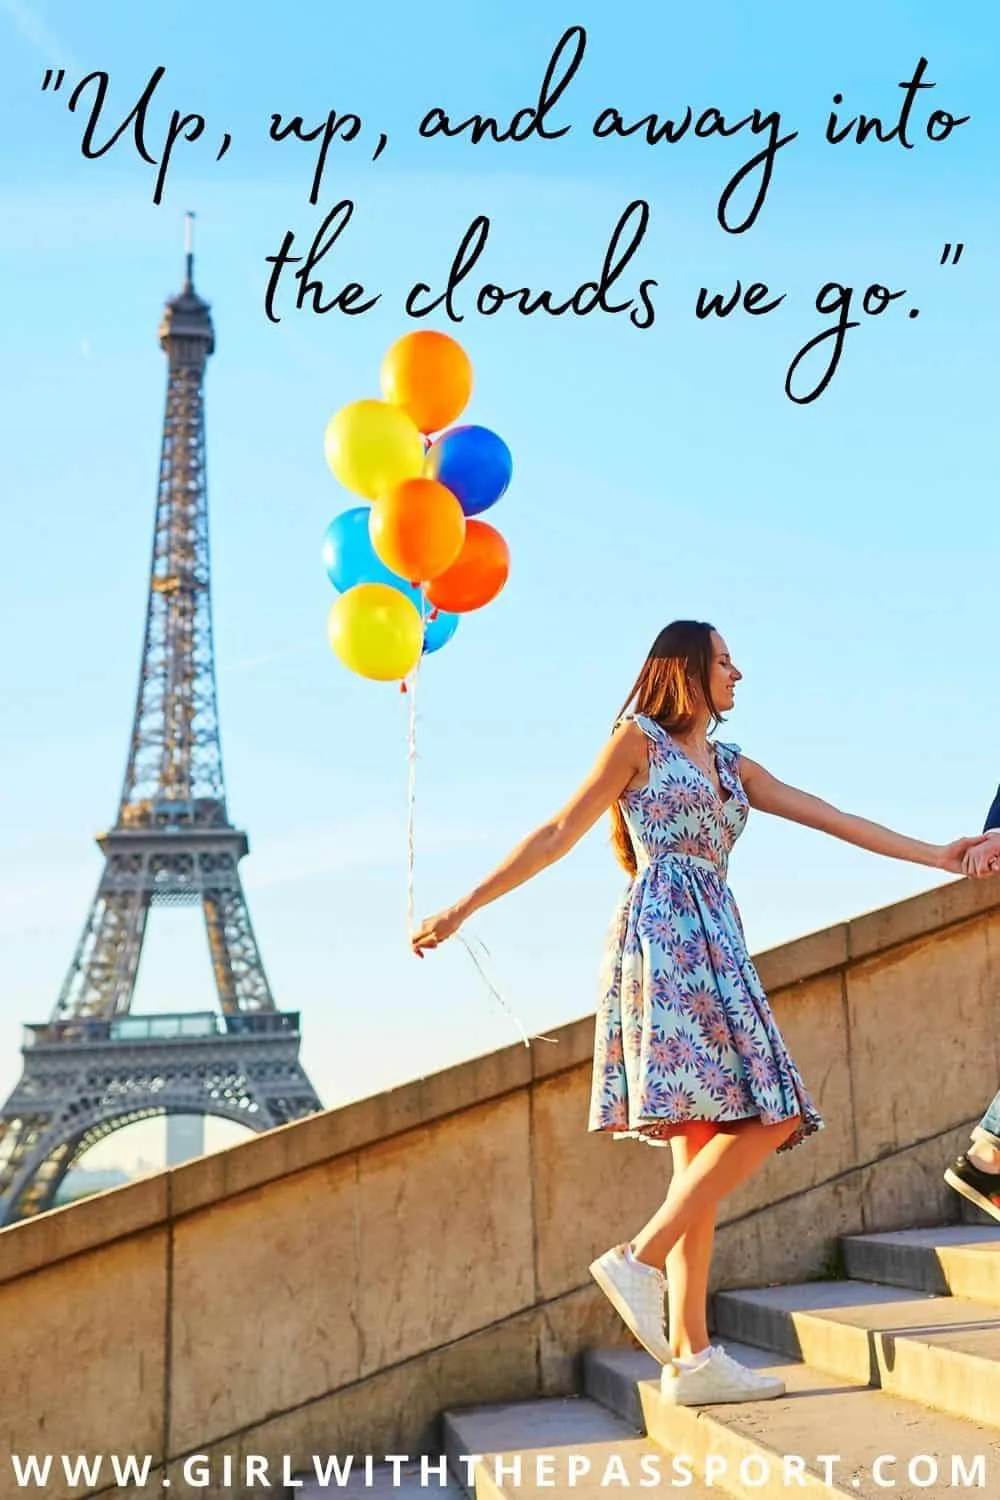 Paris travel quotes on an image of a girl with colorful balloons in front of the Eiffel tower.